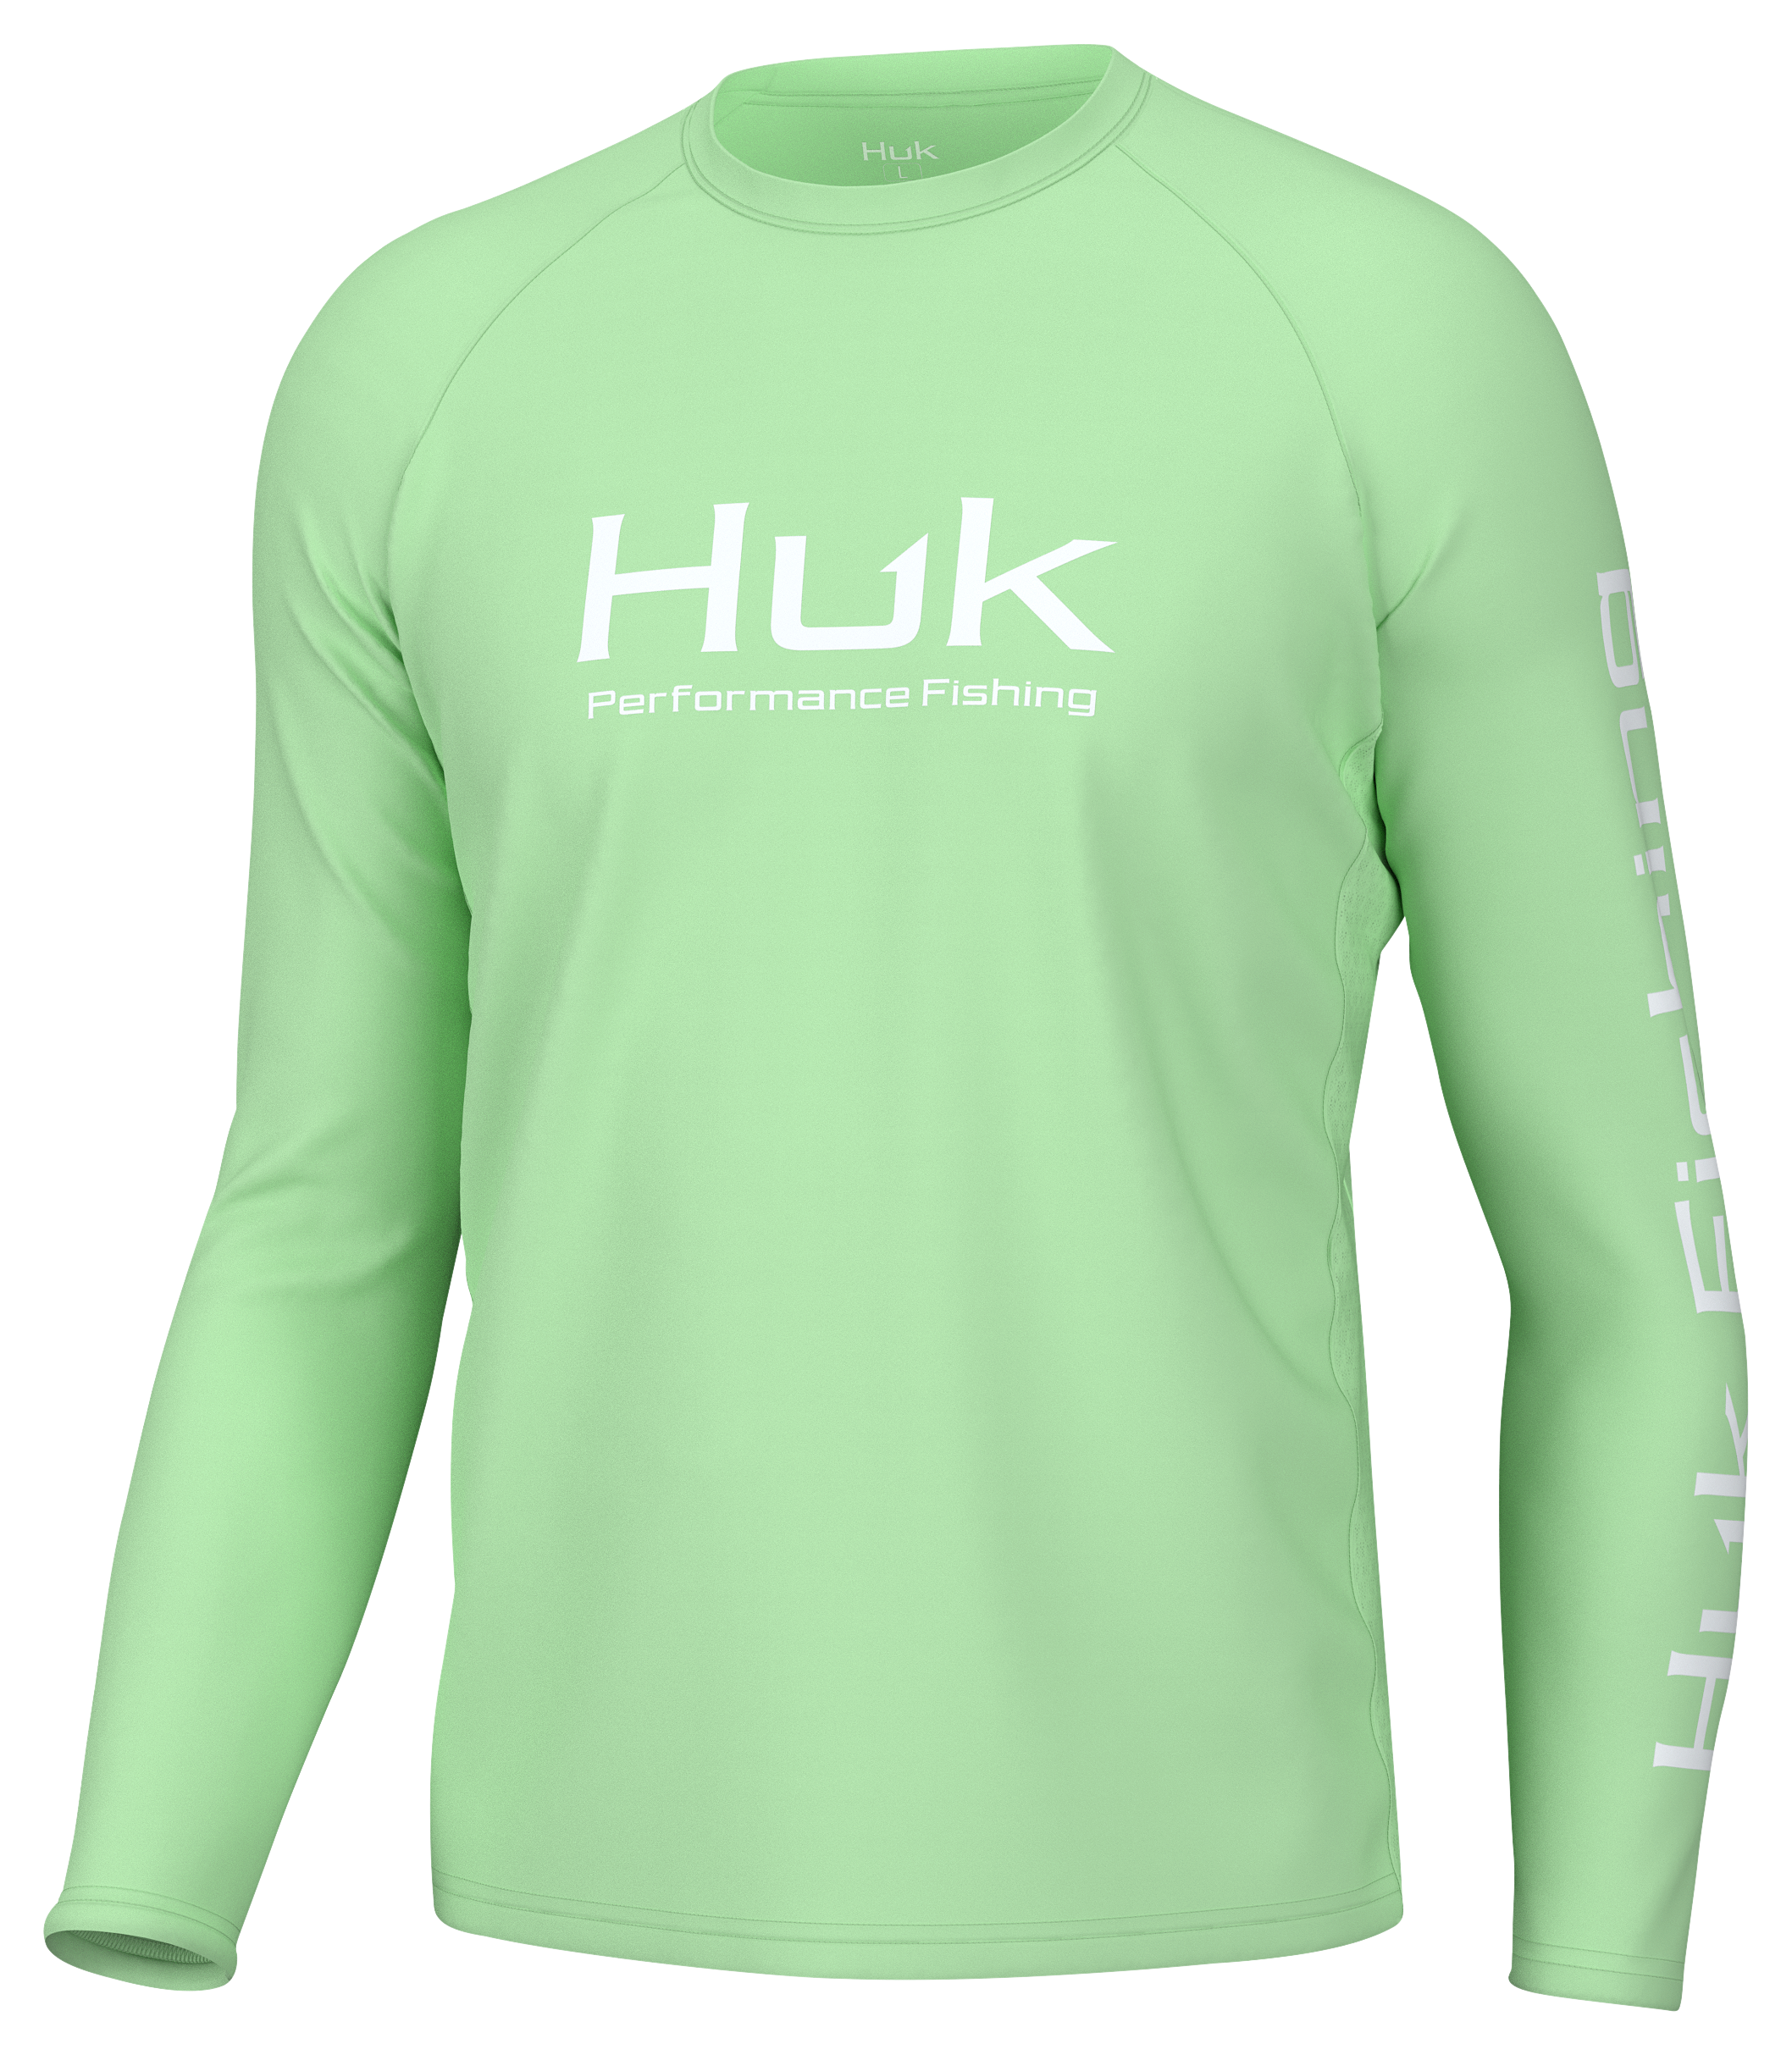 New! Huk Vented Pursuit Logo Graphic Long-Sleeve Shirt for Men